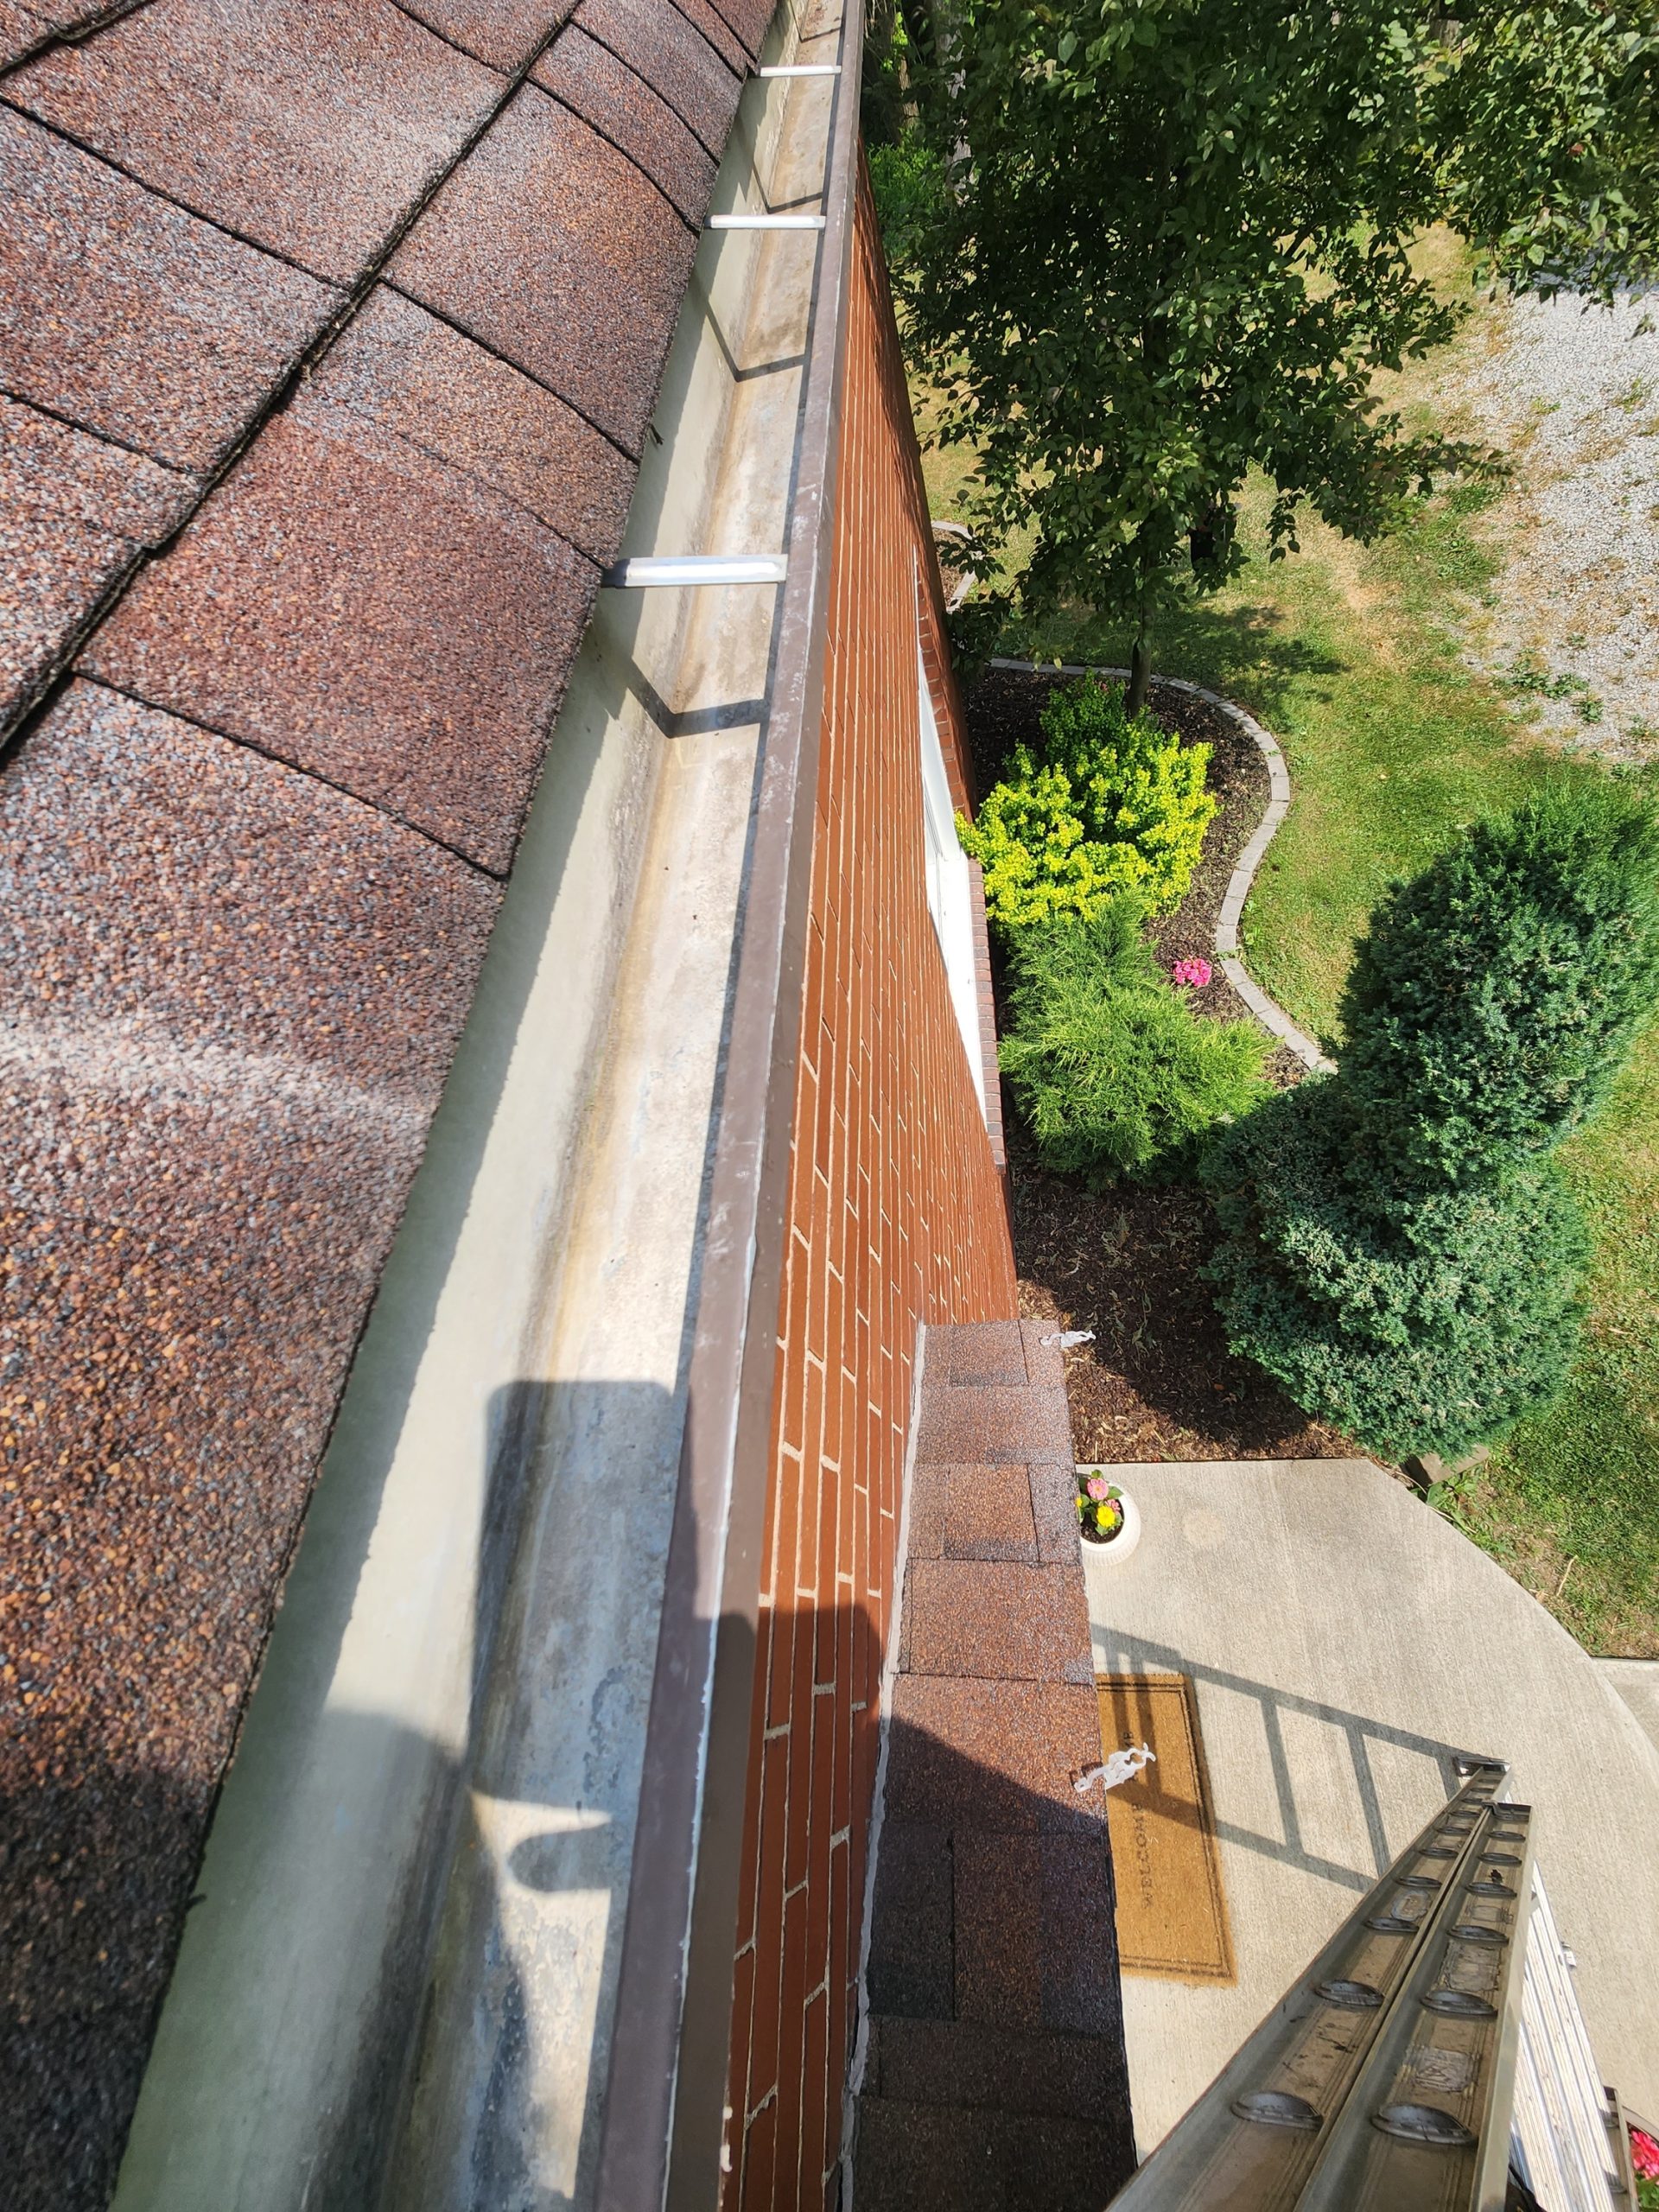 Quality Little Rock Gutter Cleaning Services